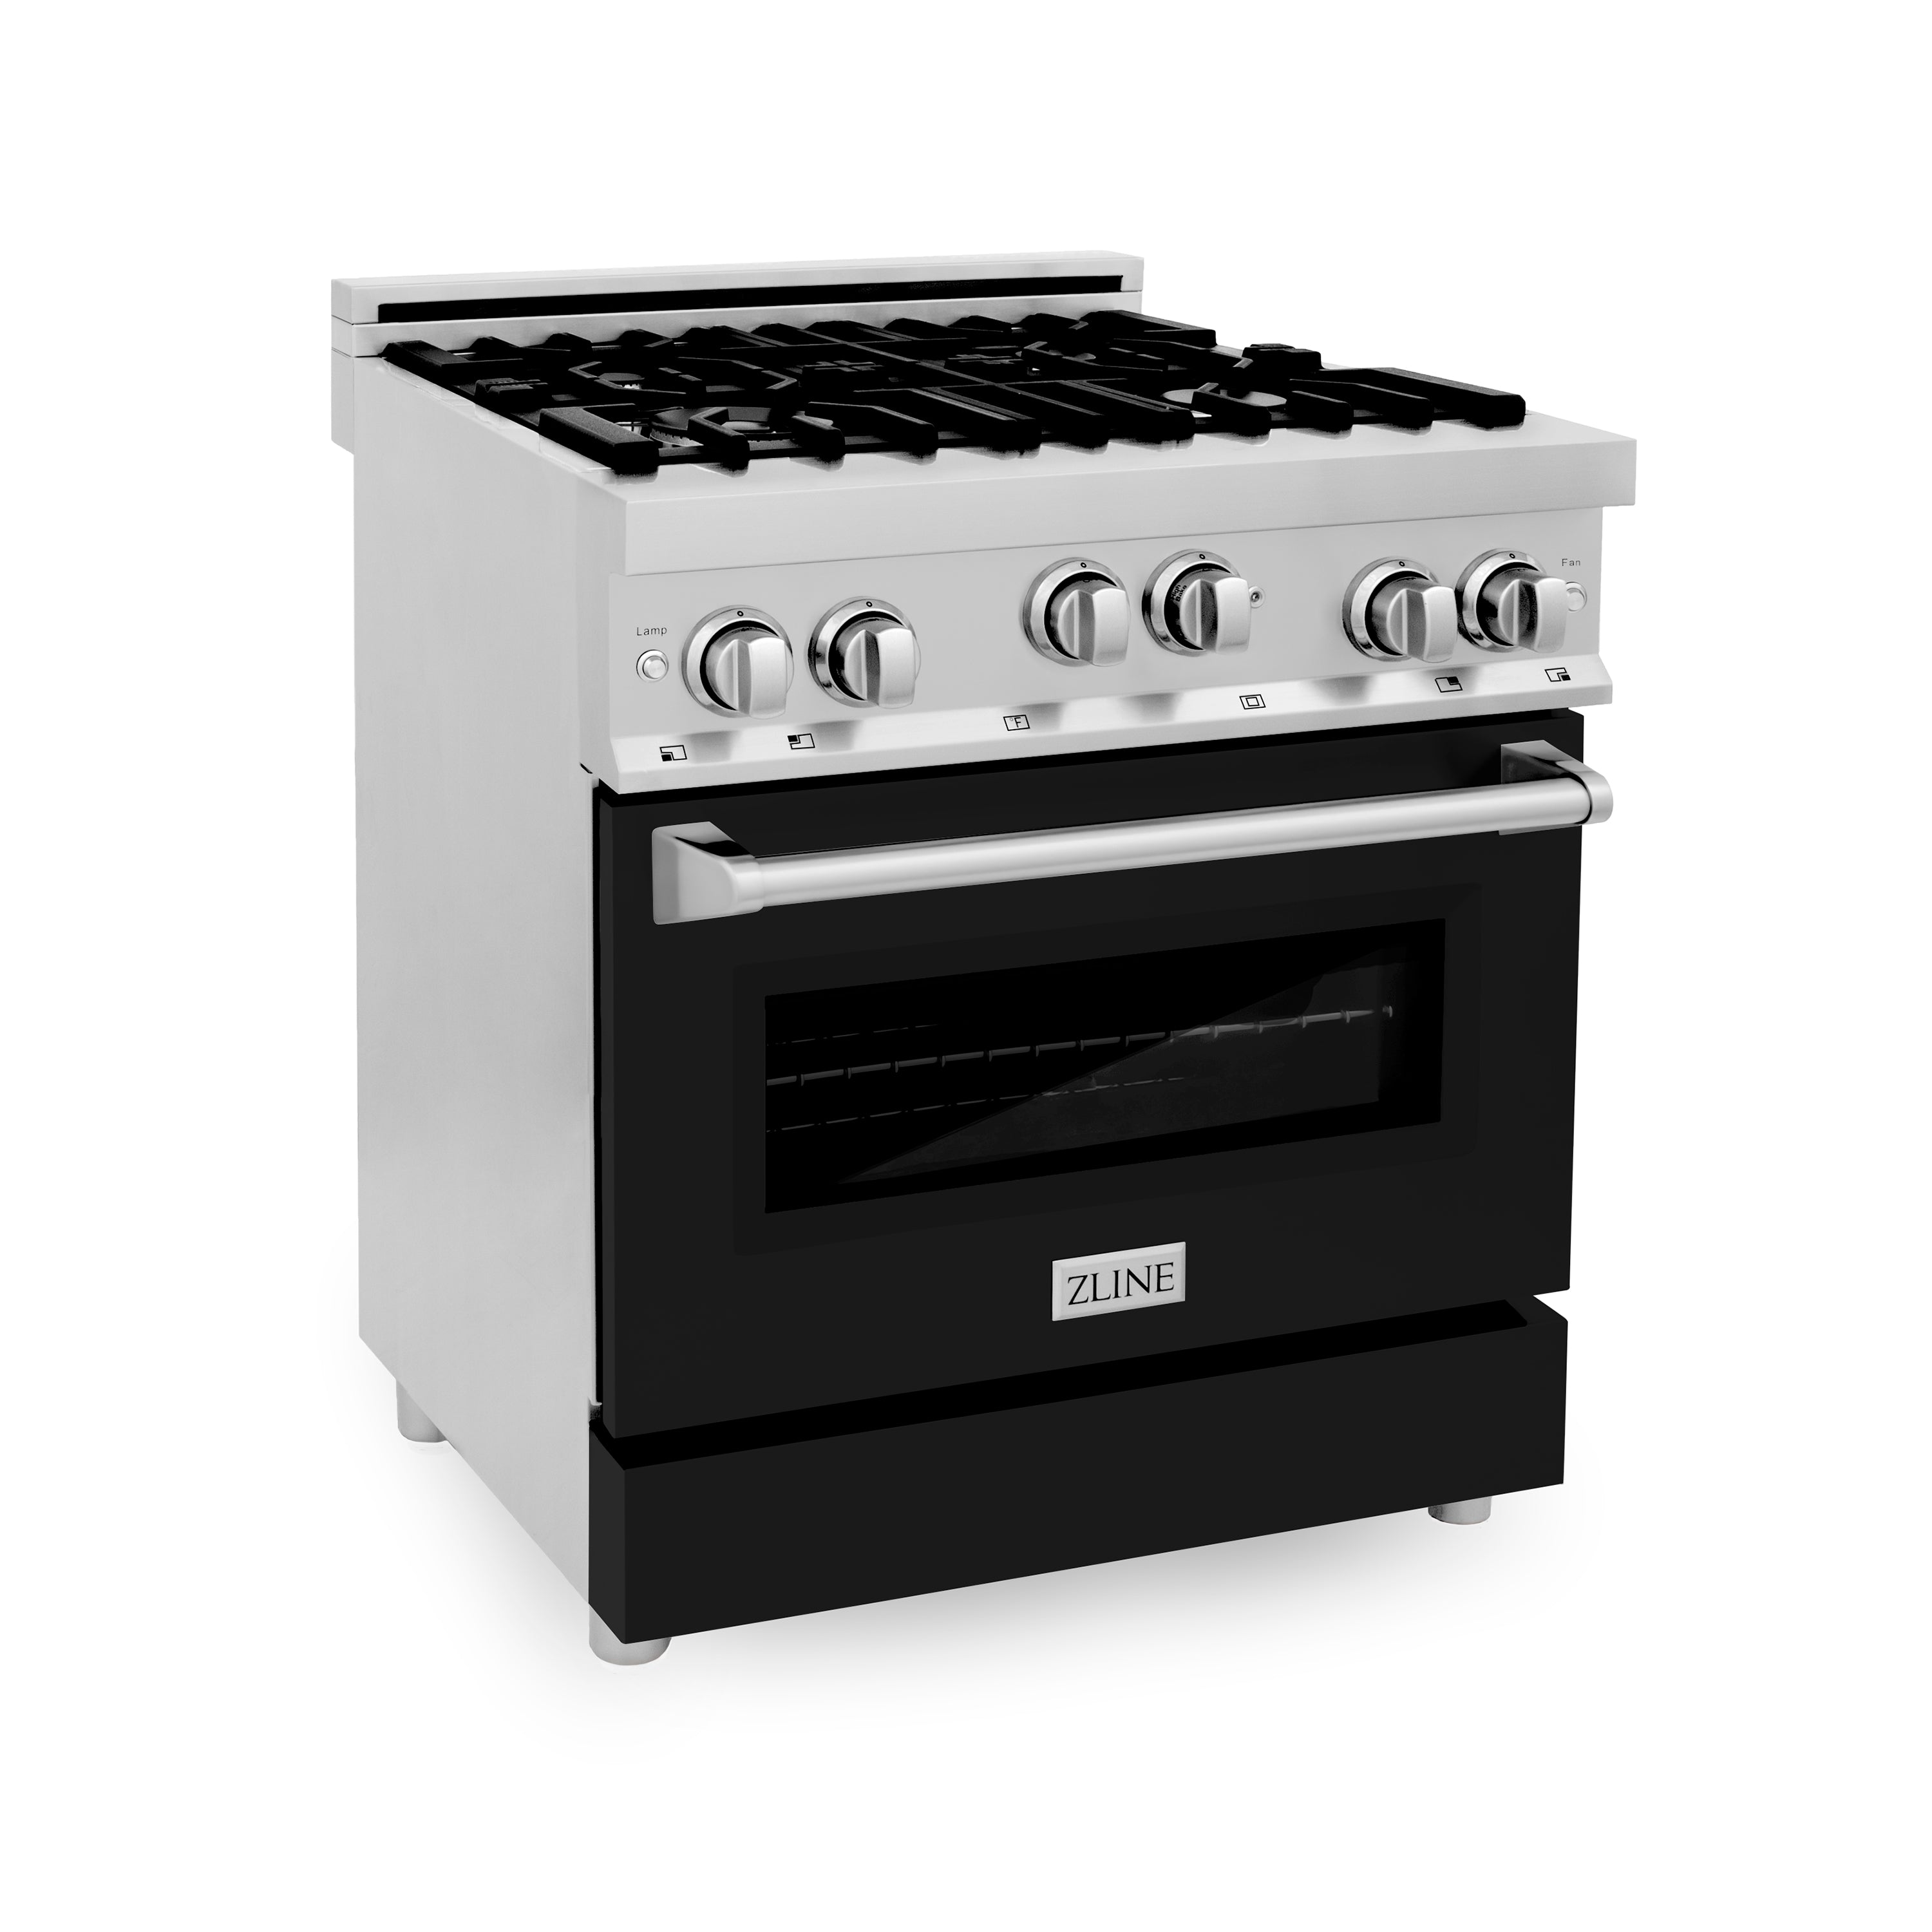 ZLINE 30" 4.0 cu. ft. Range with Gas Stove and Gas Oven in Stainless Steel (RG30)